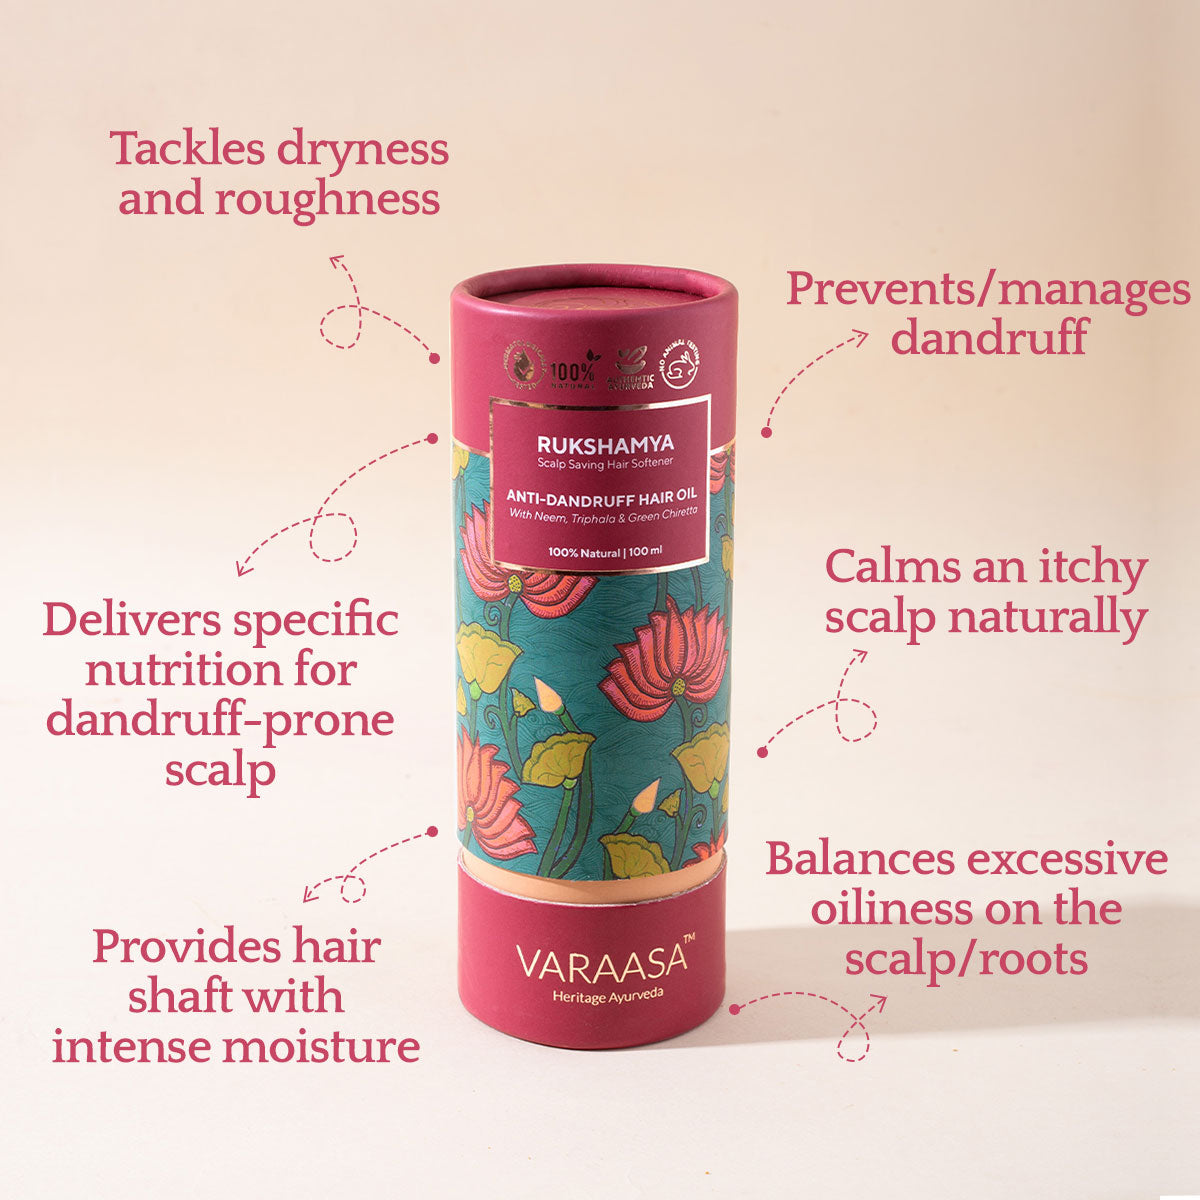 Manages dandruff, Calms an itchy scalp naturally, Balances oiliness on scalp, Delivers specific nutrition, Tackles dryness and roughness, Moisturises 